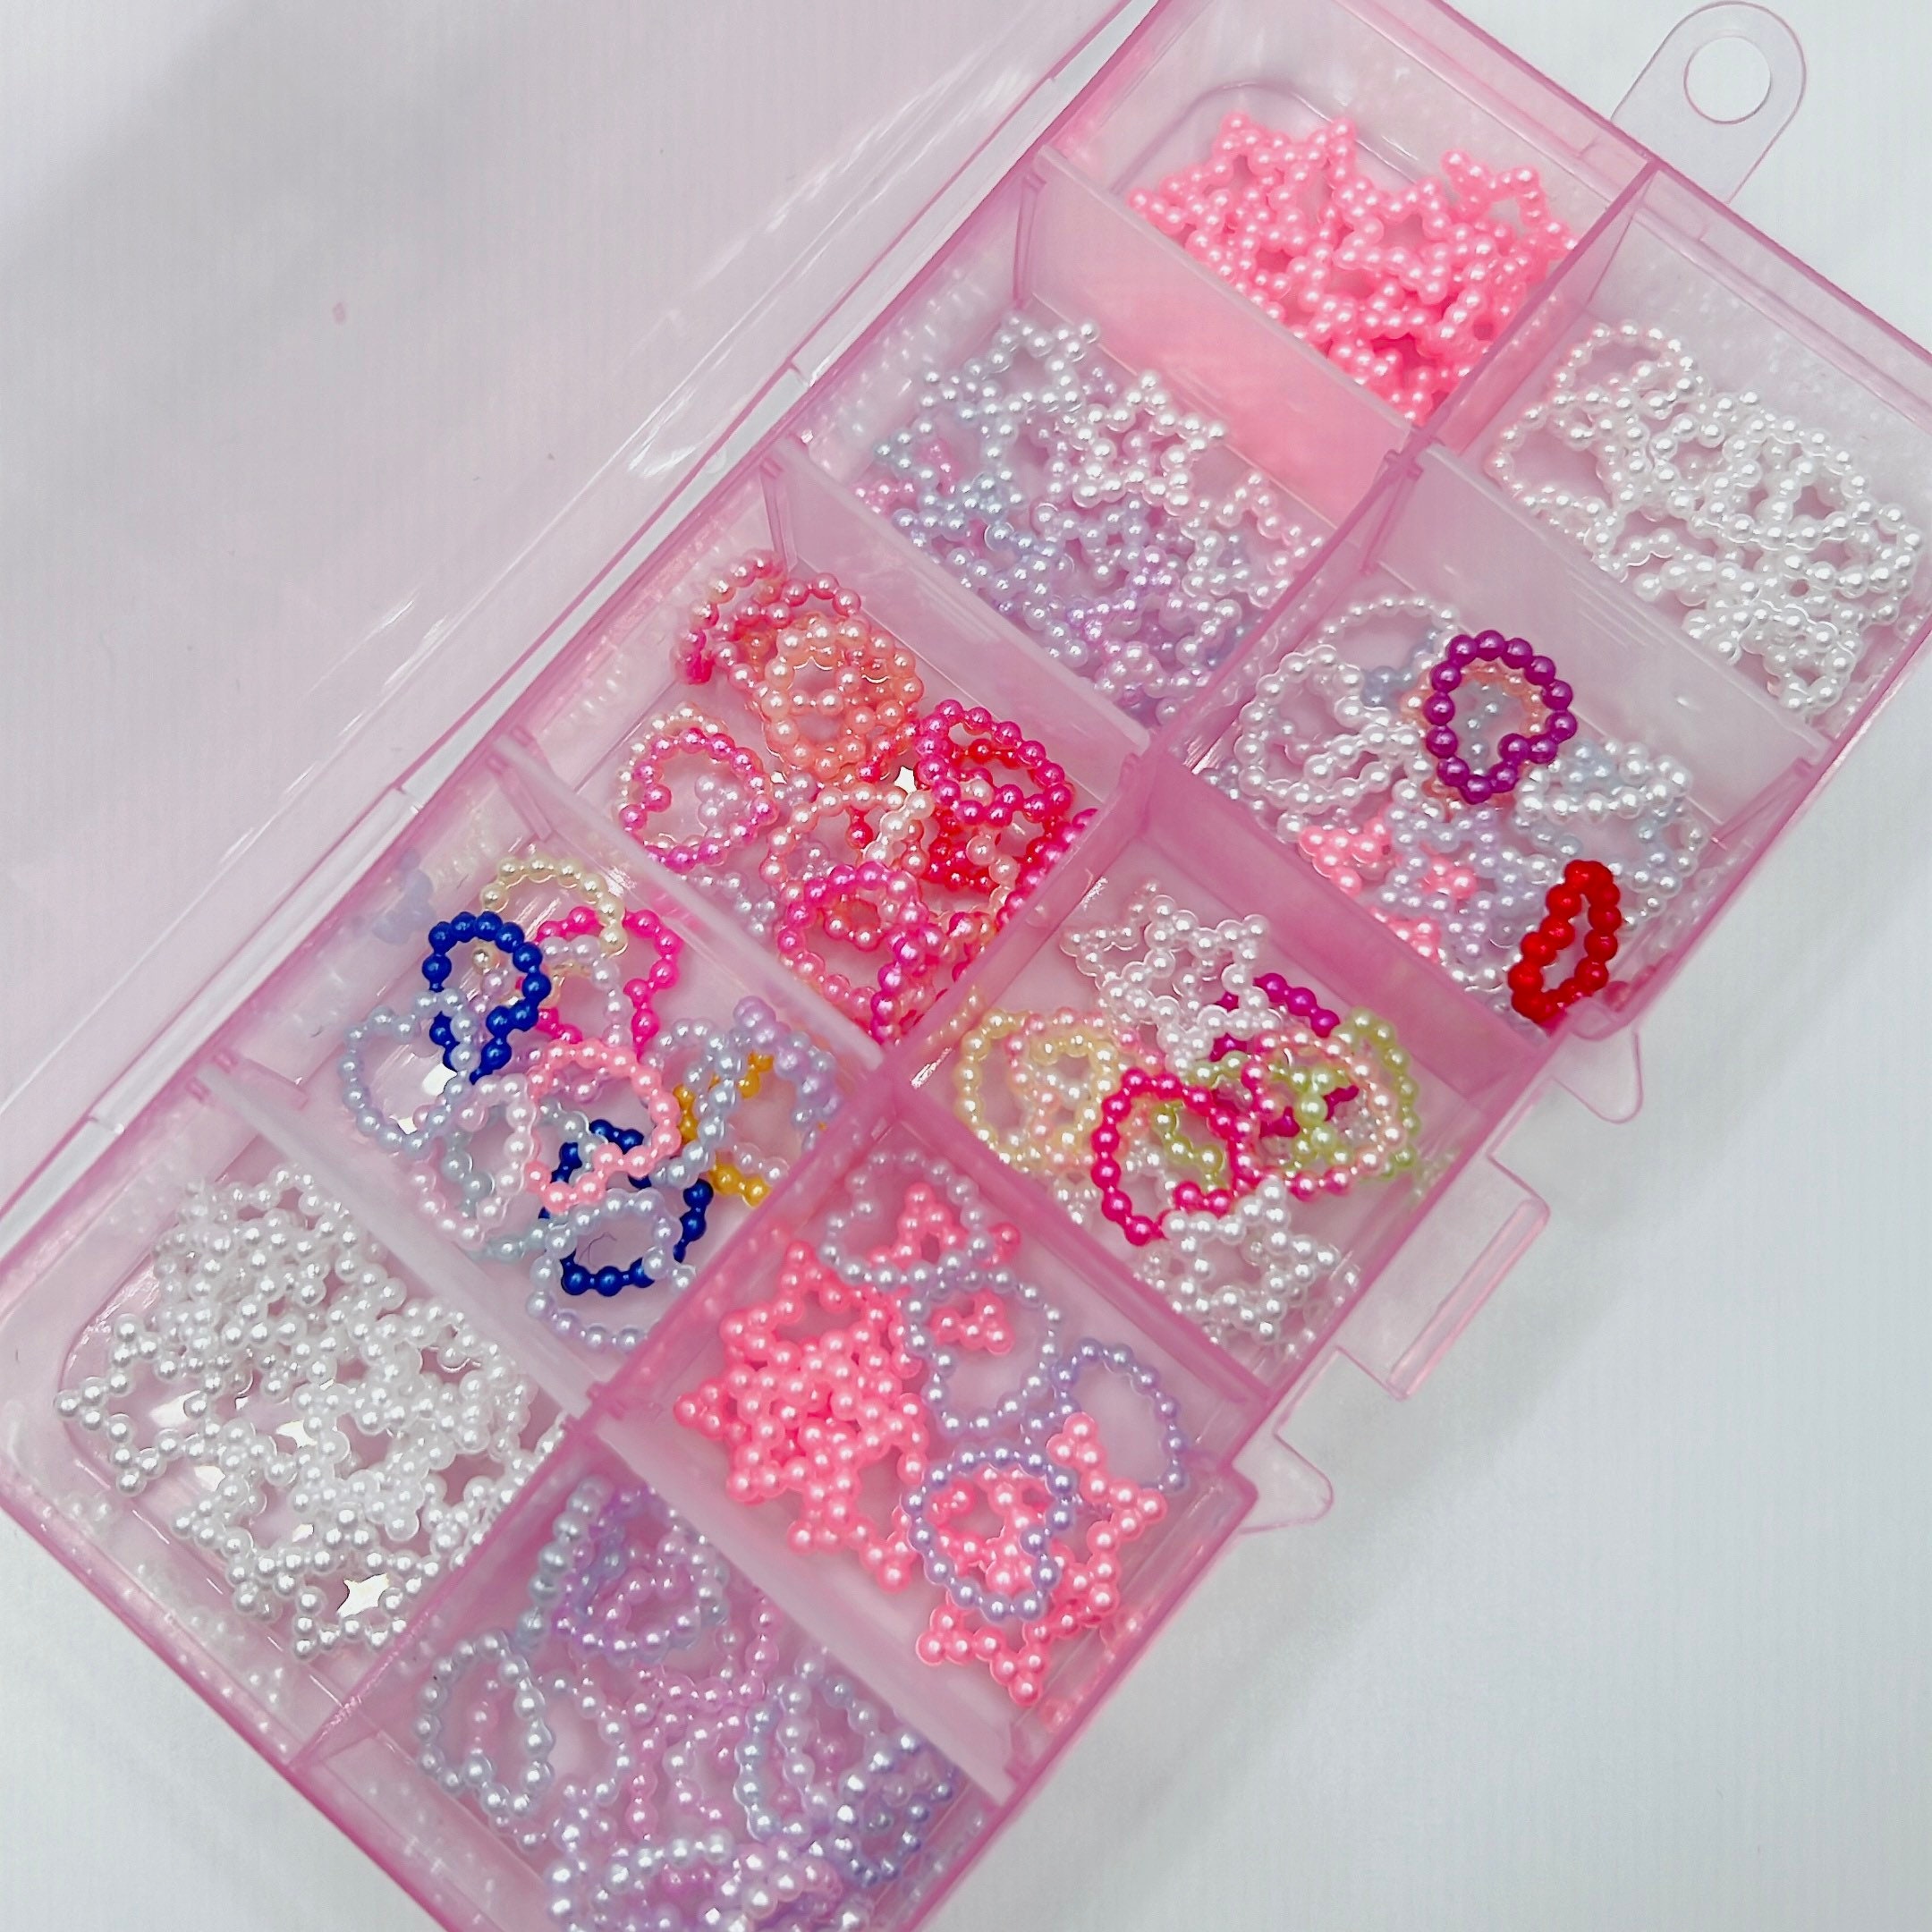 30Pcs Nails Charms Candy Mixed Resin Nail Art Tips Rhinestones 3D DIY  Accessory - Neel, Robinson & Stafford, LLC - Providing excellent service  for over 21 years.